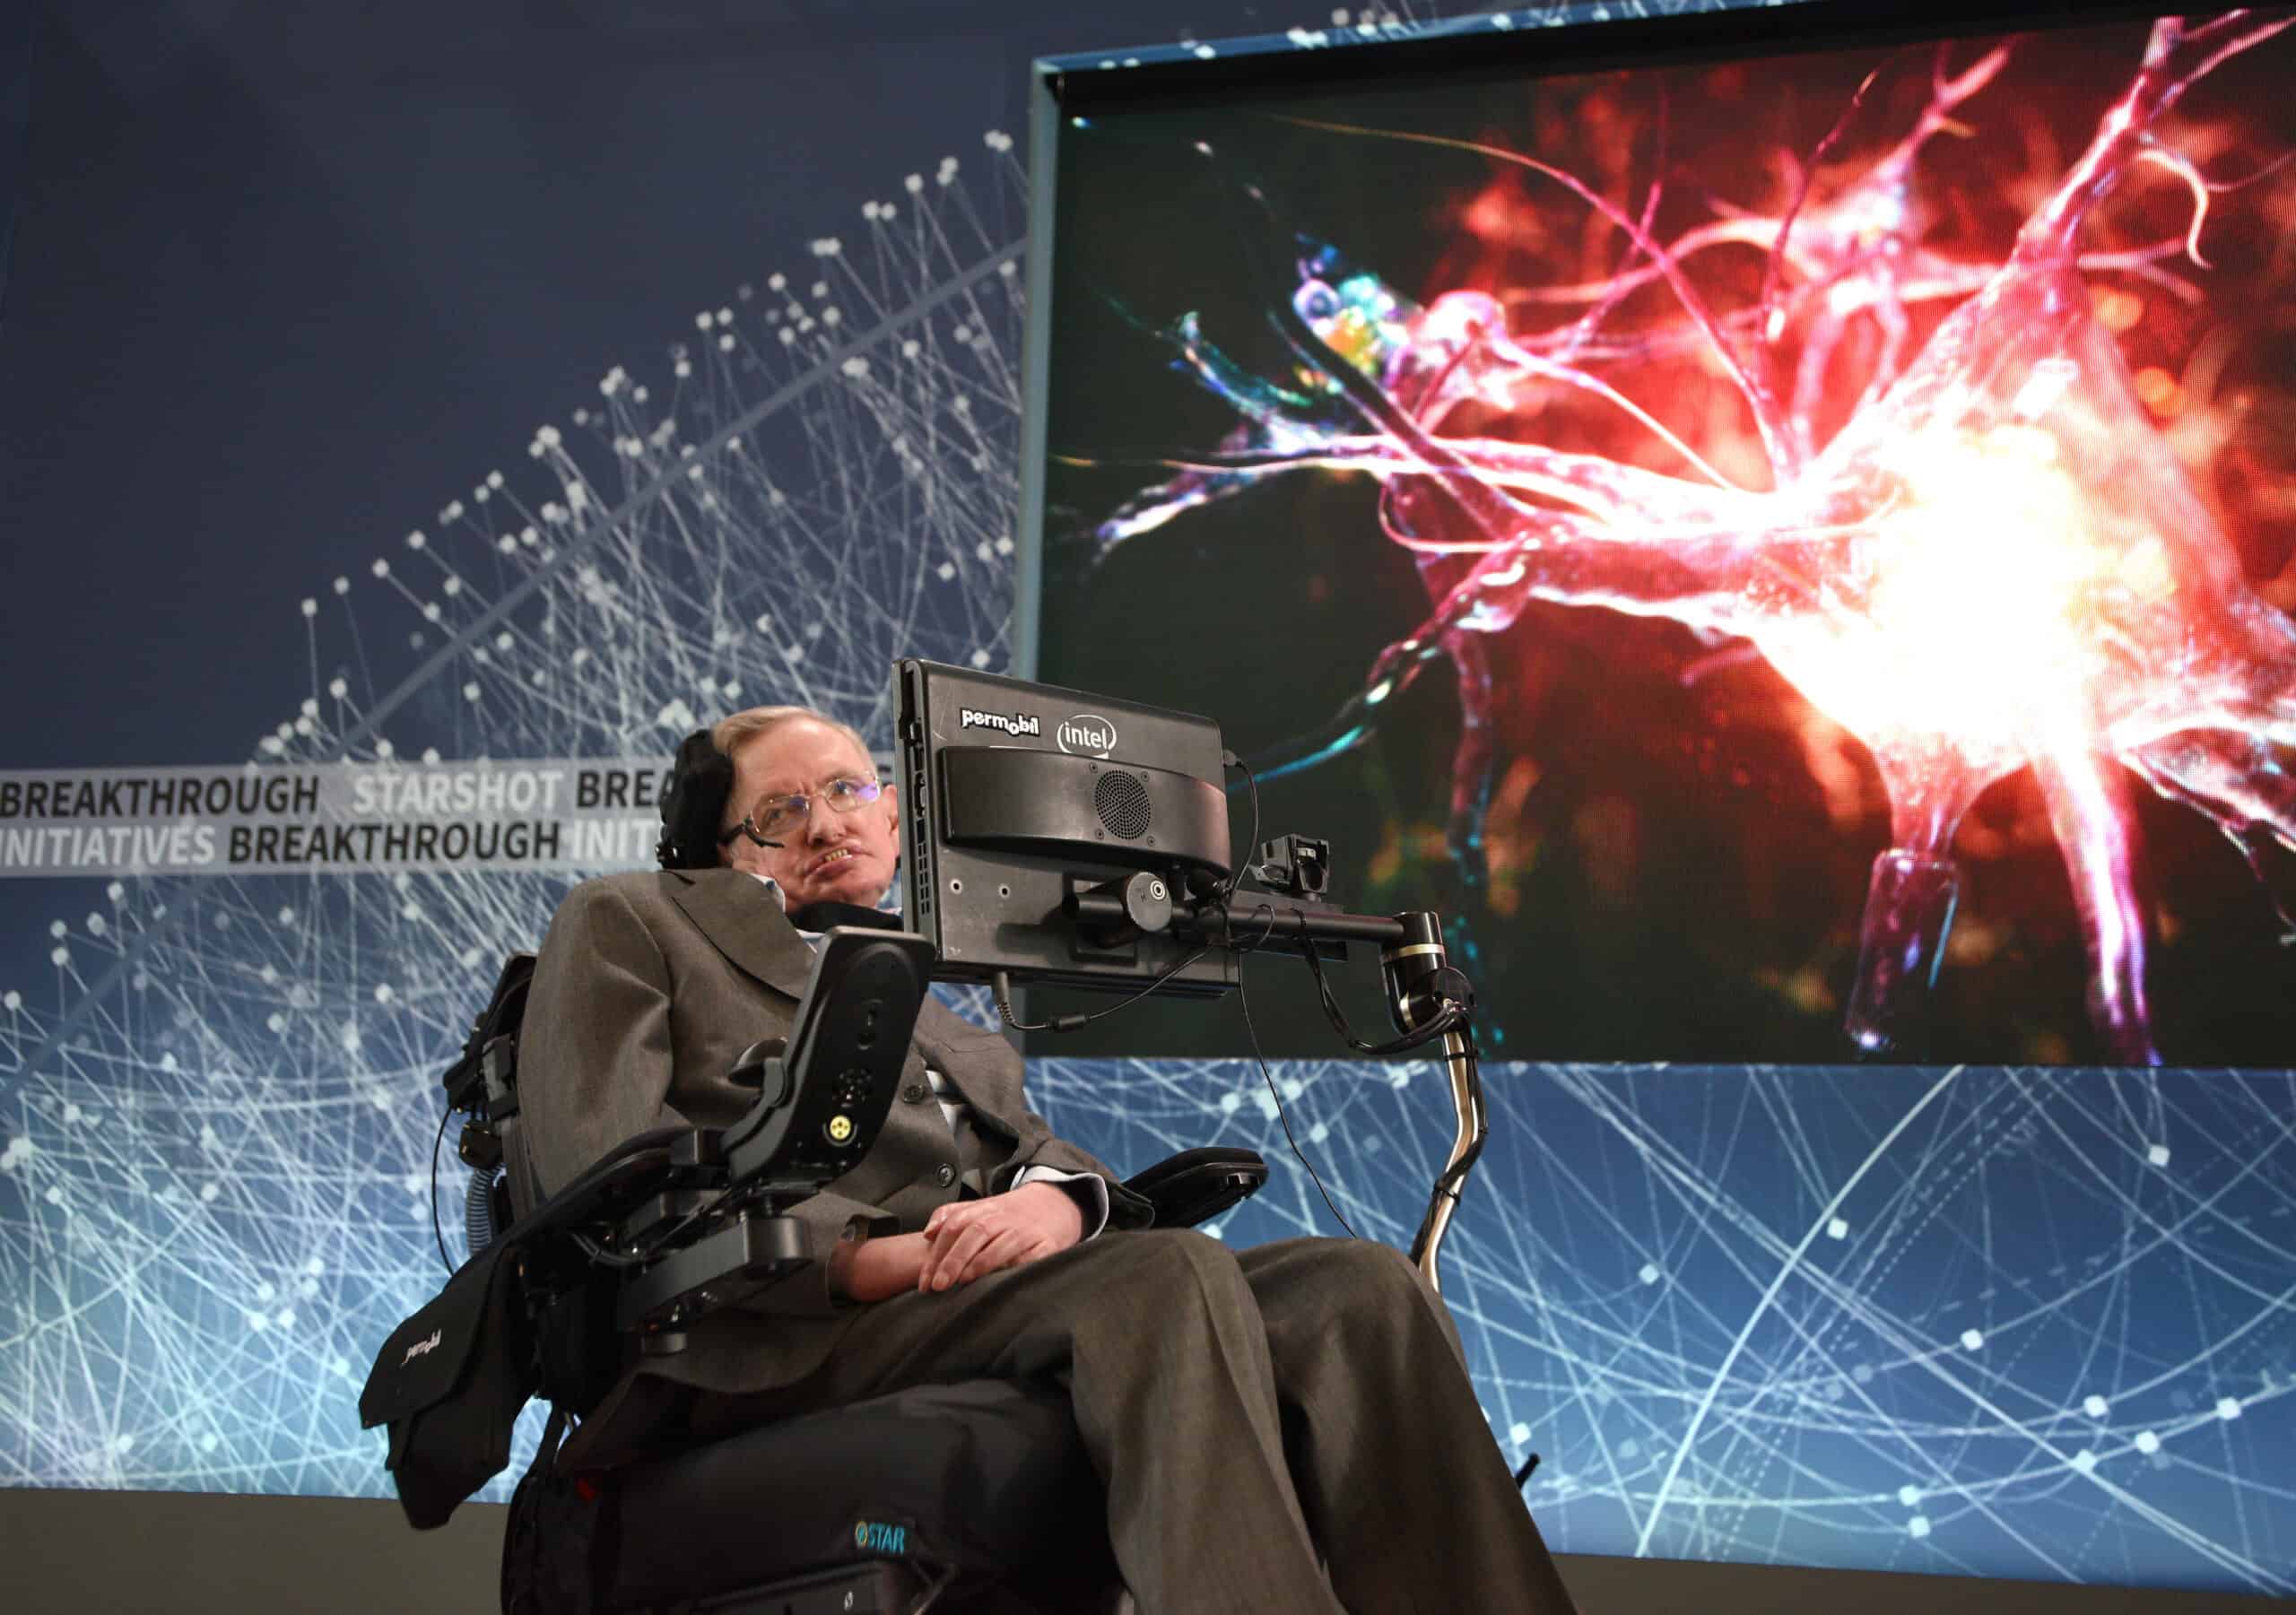 <p>Stephen Hawking was a wheelchair user for most of his adult life. While he suffered from the harrowing ALS for 55 years, he made the most of his time on <a href="https://history-computer.com/how-many-moons-does-earth-have/?utm_campaign=msn&utm_source=msn_slideshow&utm_content=542575&utm_medium=in_content" rel="noopener">earth</a>. About life, he once stated, <strong>"Life would be tragic if it weren’t funny."</strong></p><p><span>Would you please let us know what you think about our content? <p>Agree? Tell us by clicking the “Thumbs Up” button above.</p> Disagree? Leave a comment telling us what you’d change.</span></p>